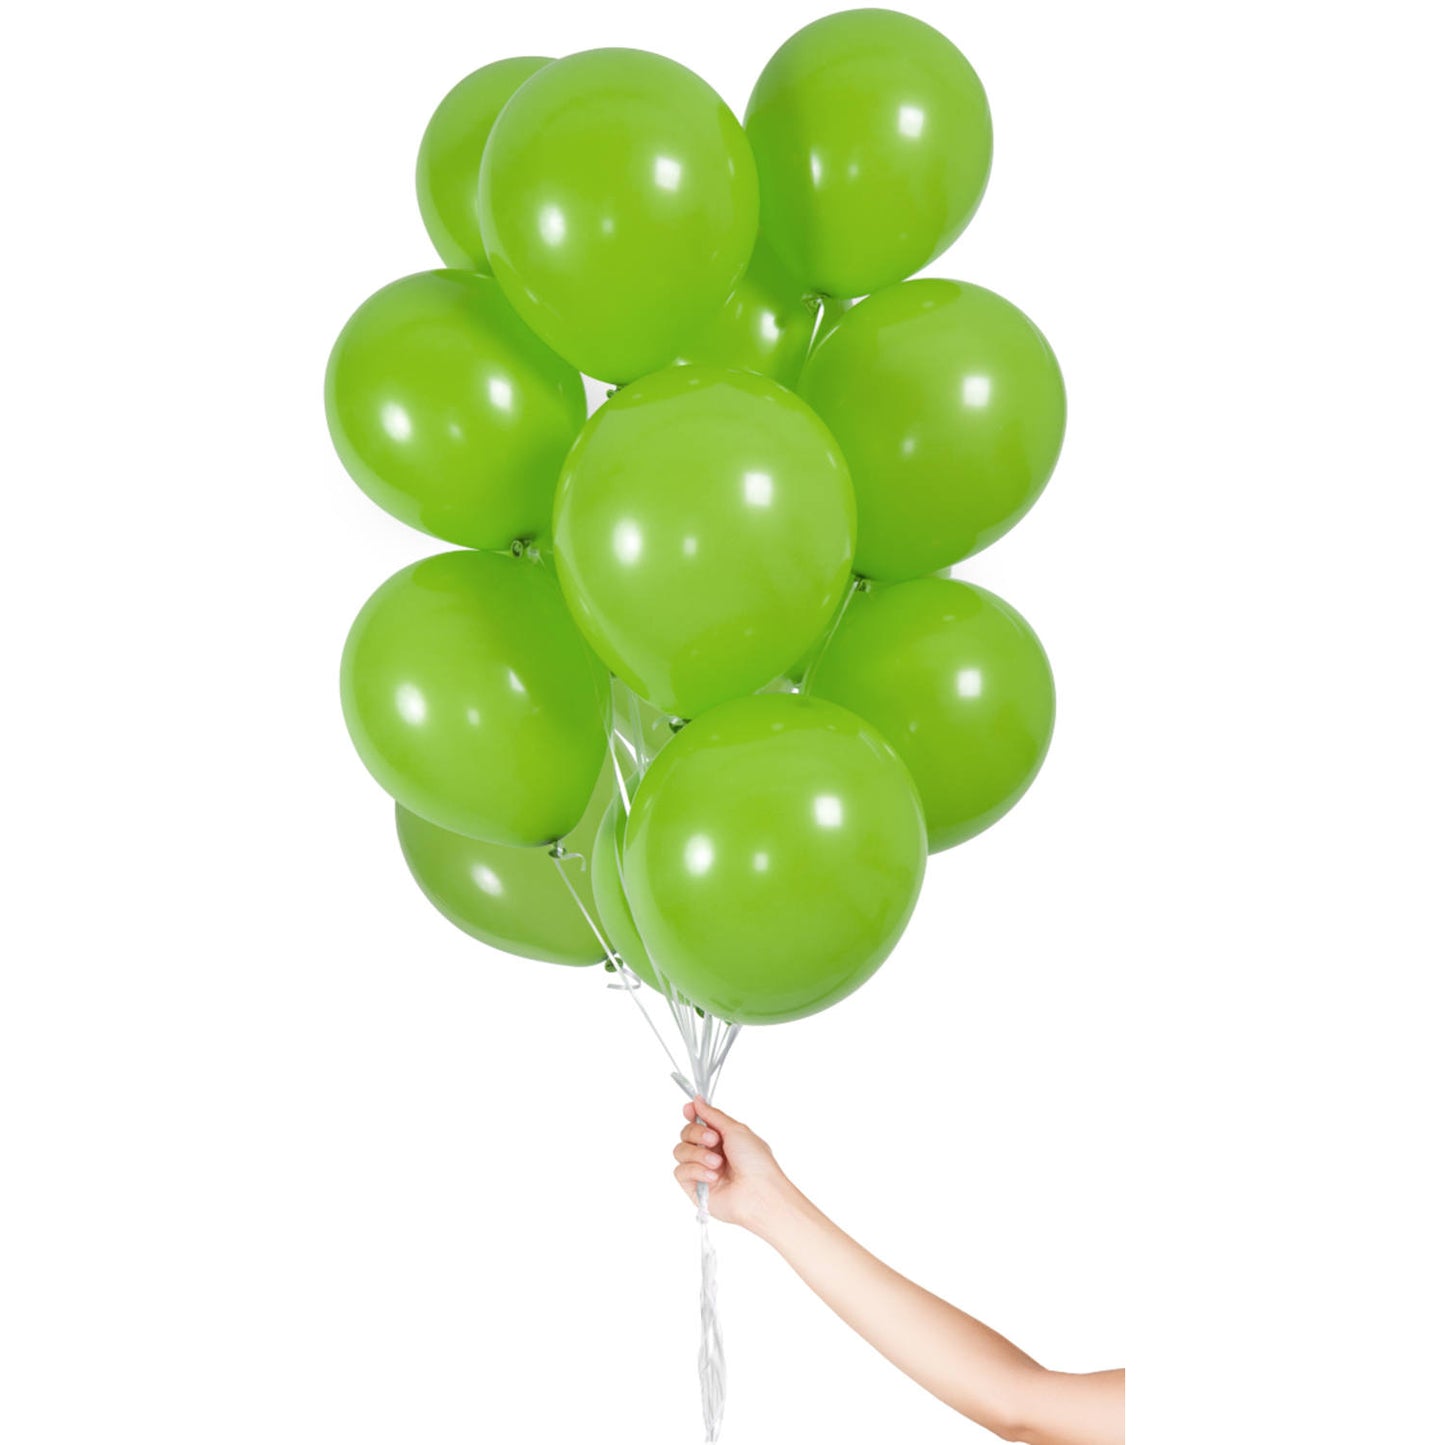 Kiwi Green Balloon Pack of 25 for birthday decoration, Anniversary Weddings Engagement, Baby Shower, New Year decoration, Theme Party balloons